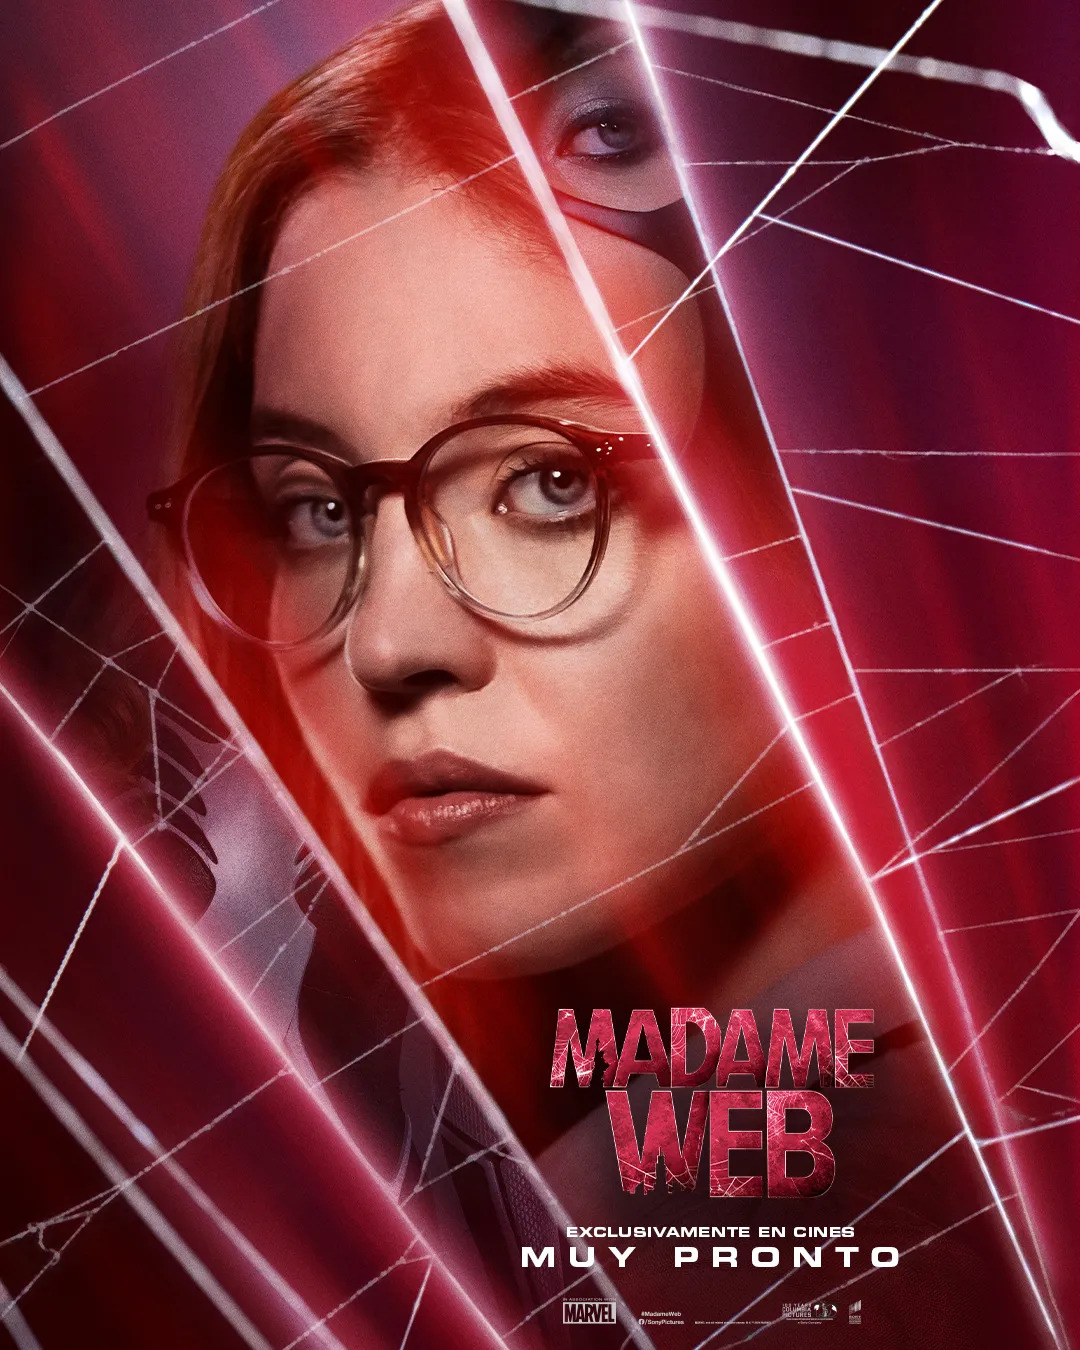 Extra Large Movie Poster Image for Madame Web (#10 of 24)